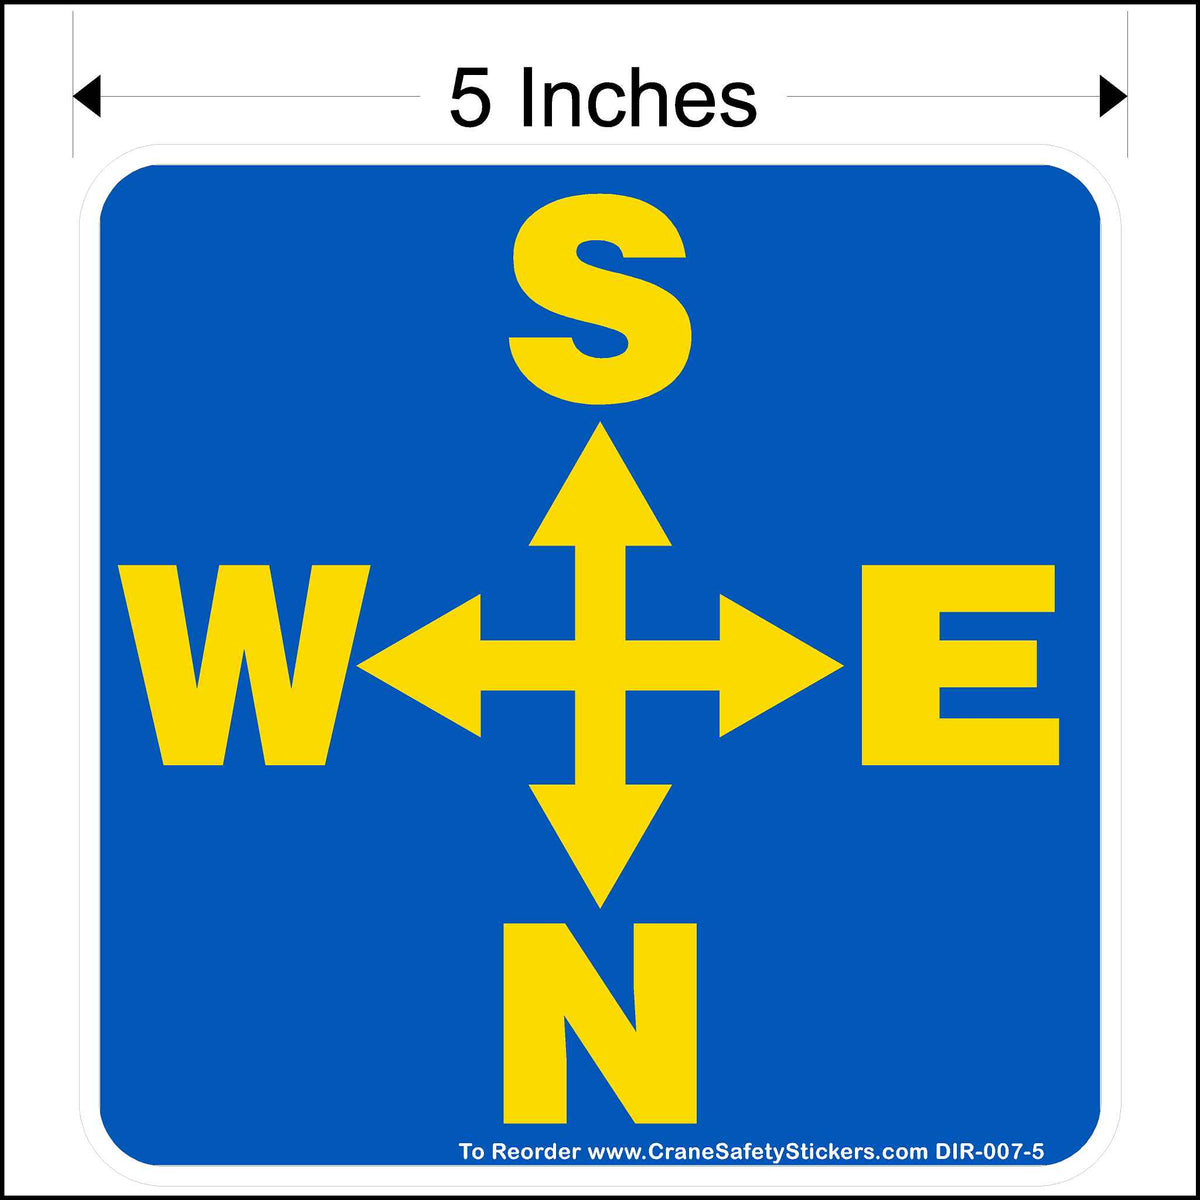 Five inch overhead crane decal printed with yellow south, notrth, east, and west arrows on a blue background.